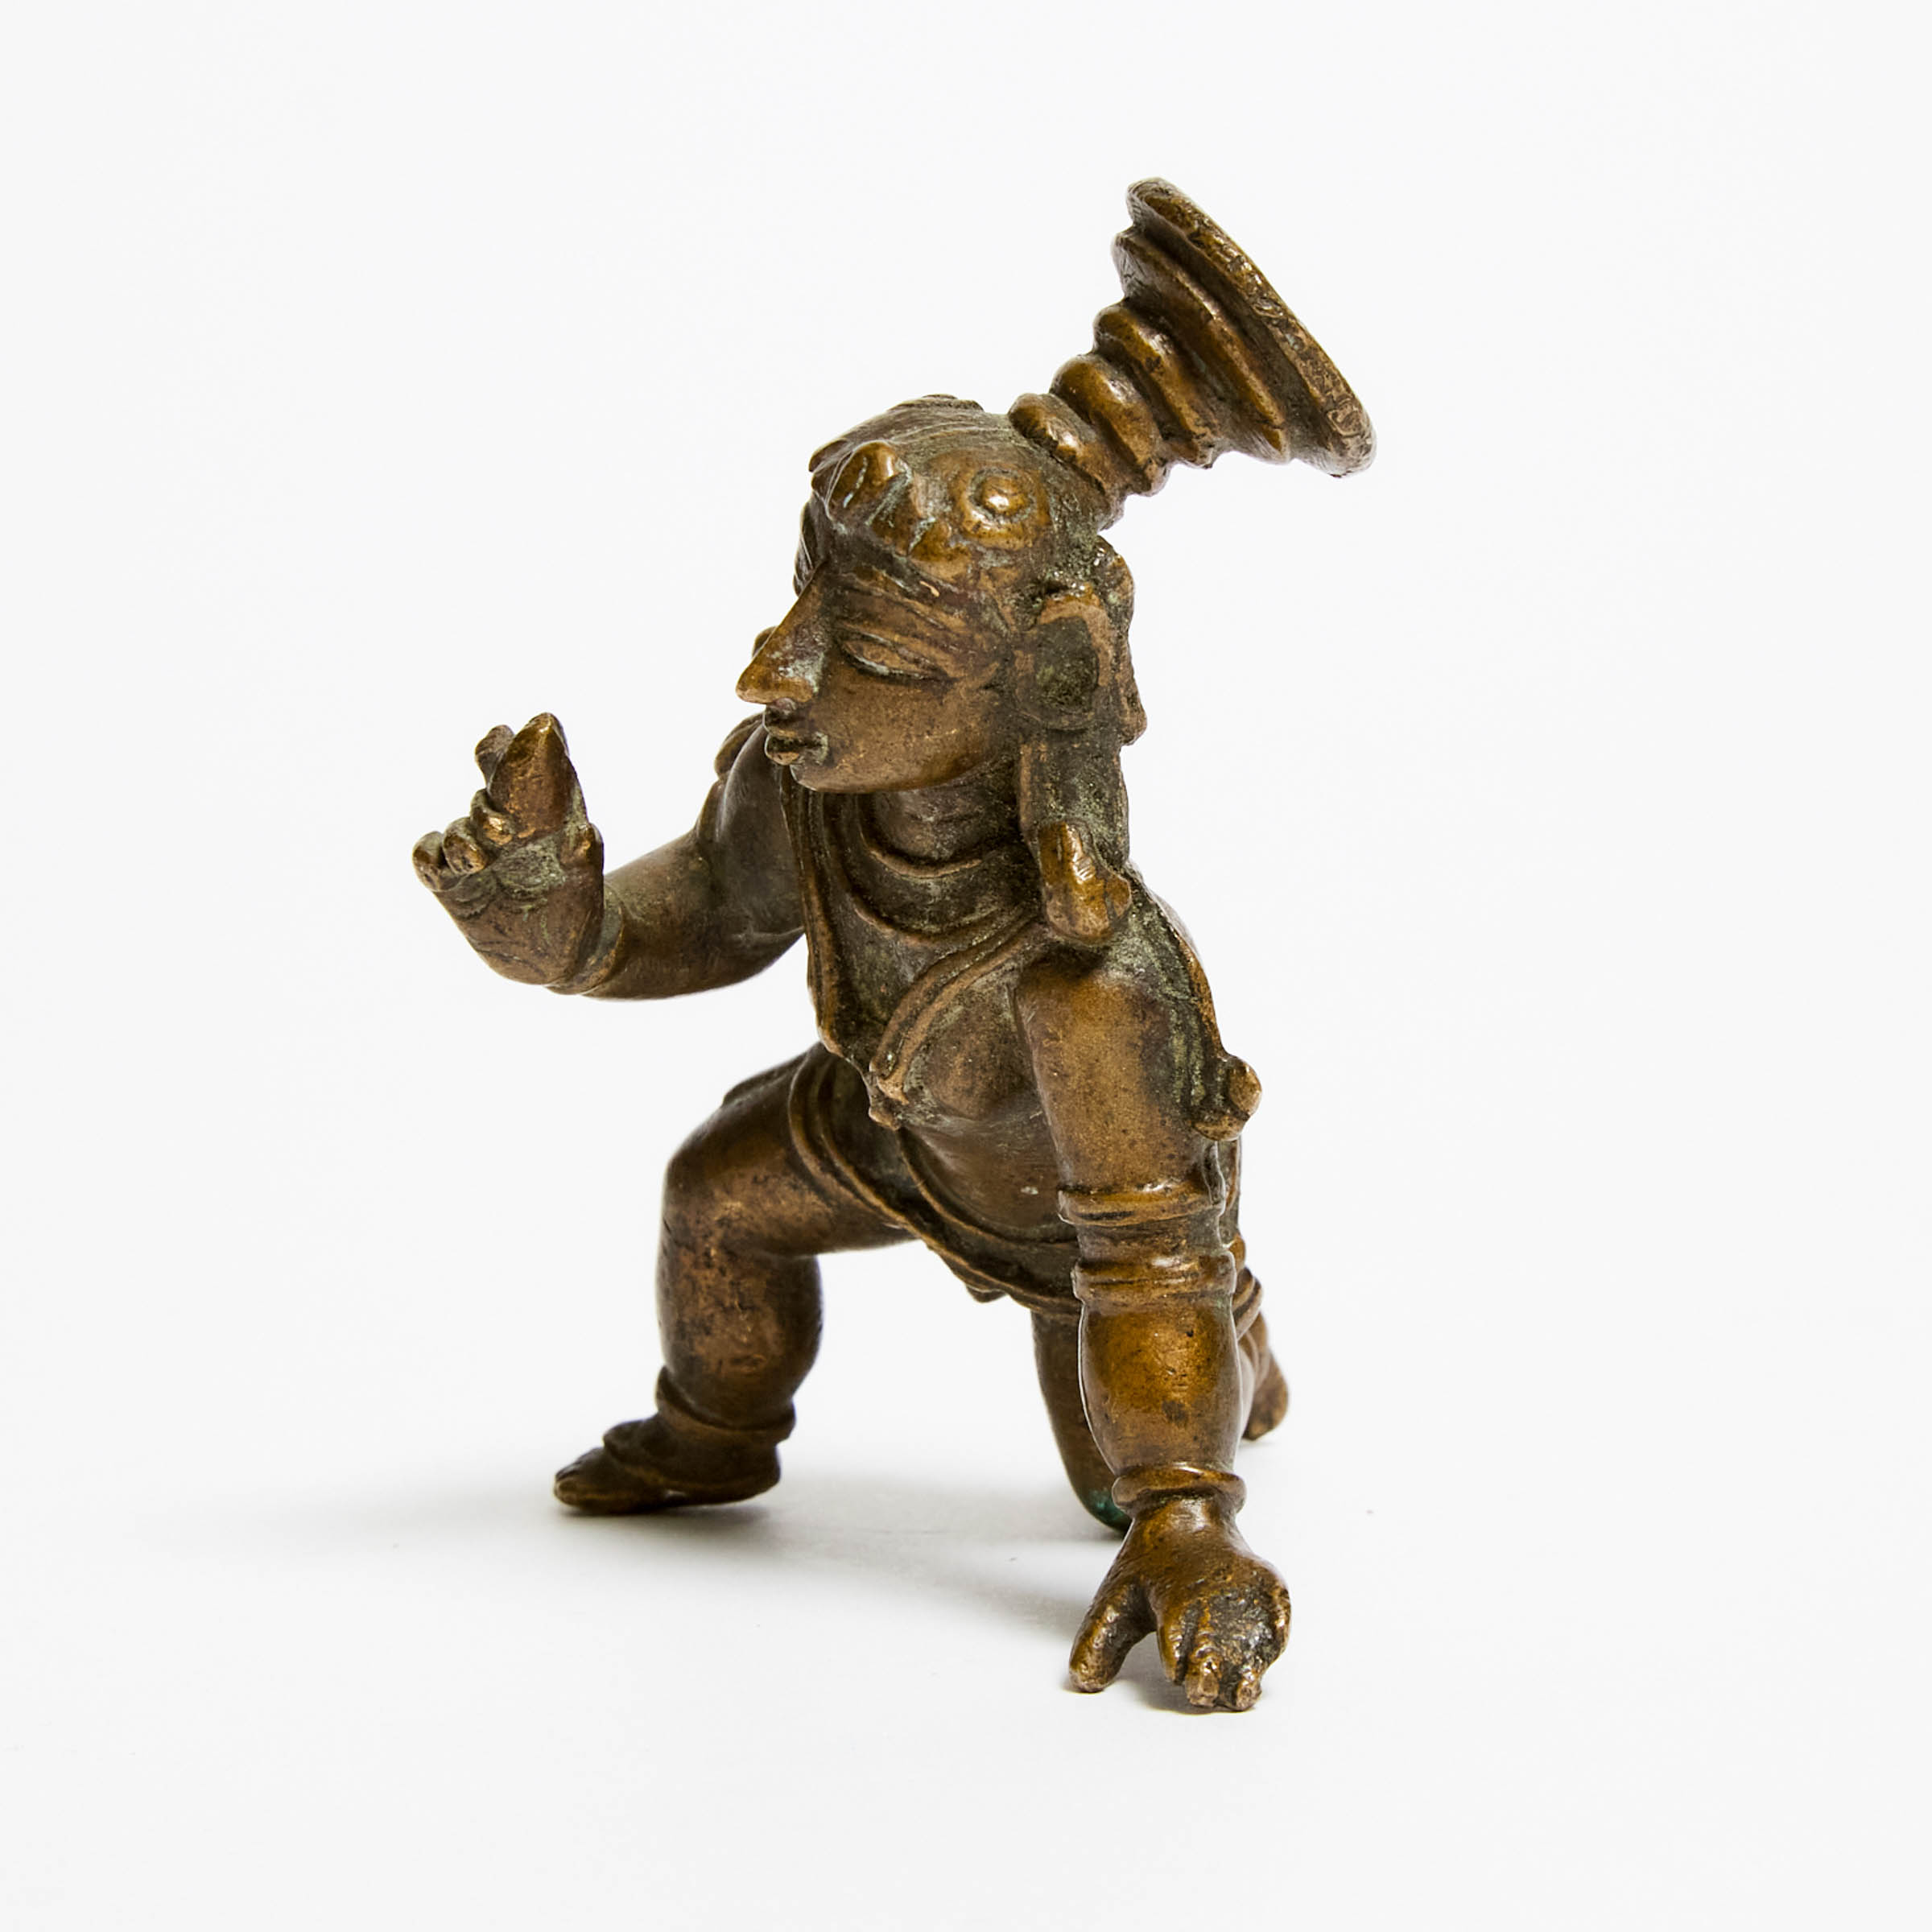 A Copper Alloy Figure of Infant Krishna, 19th Century or Earlier